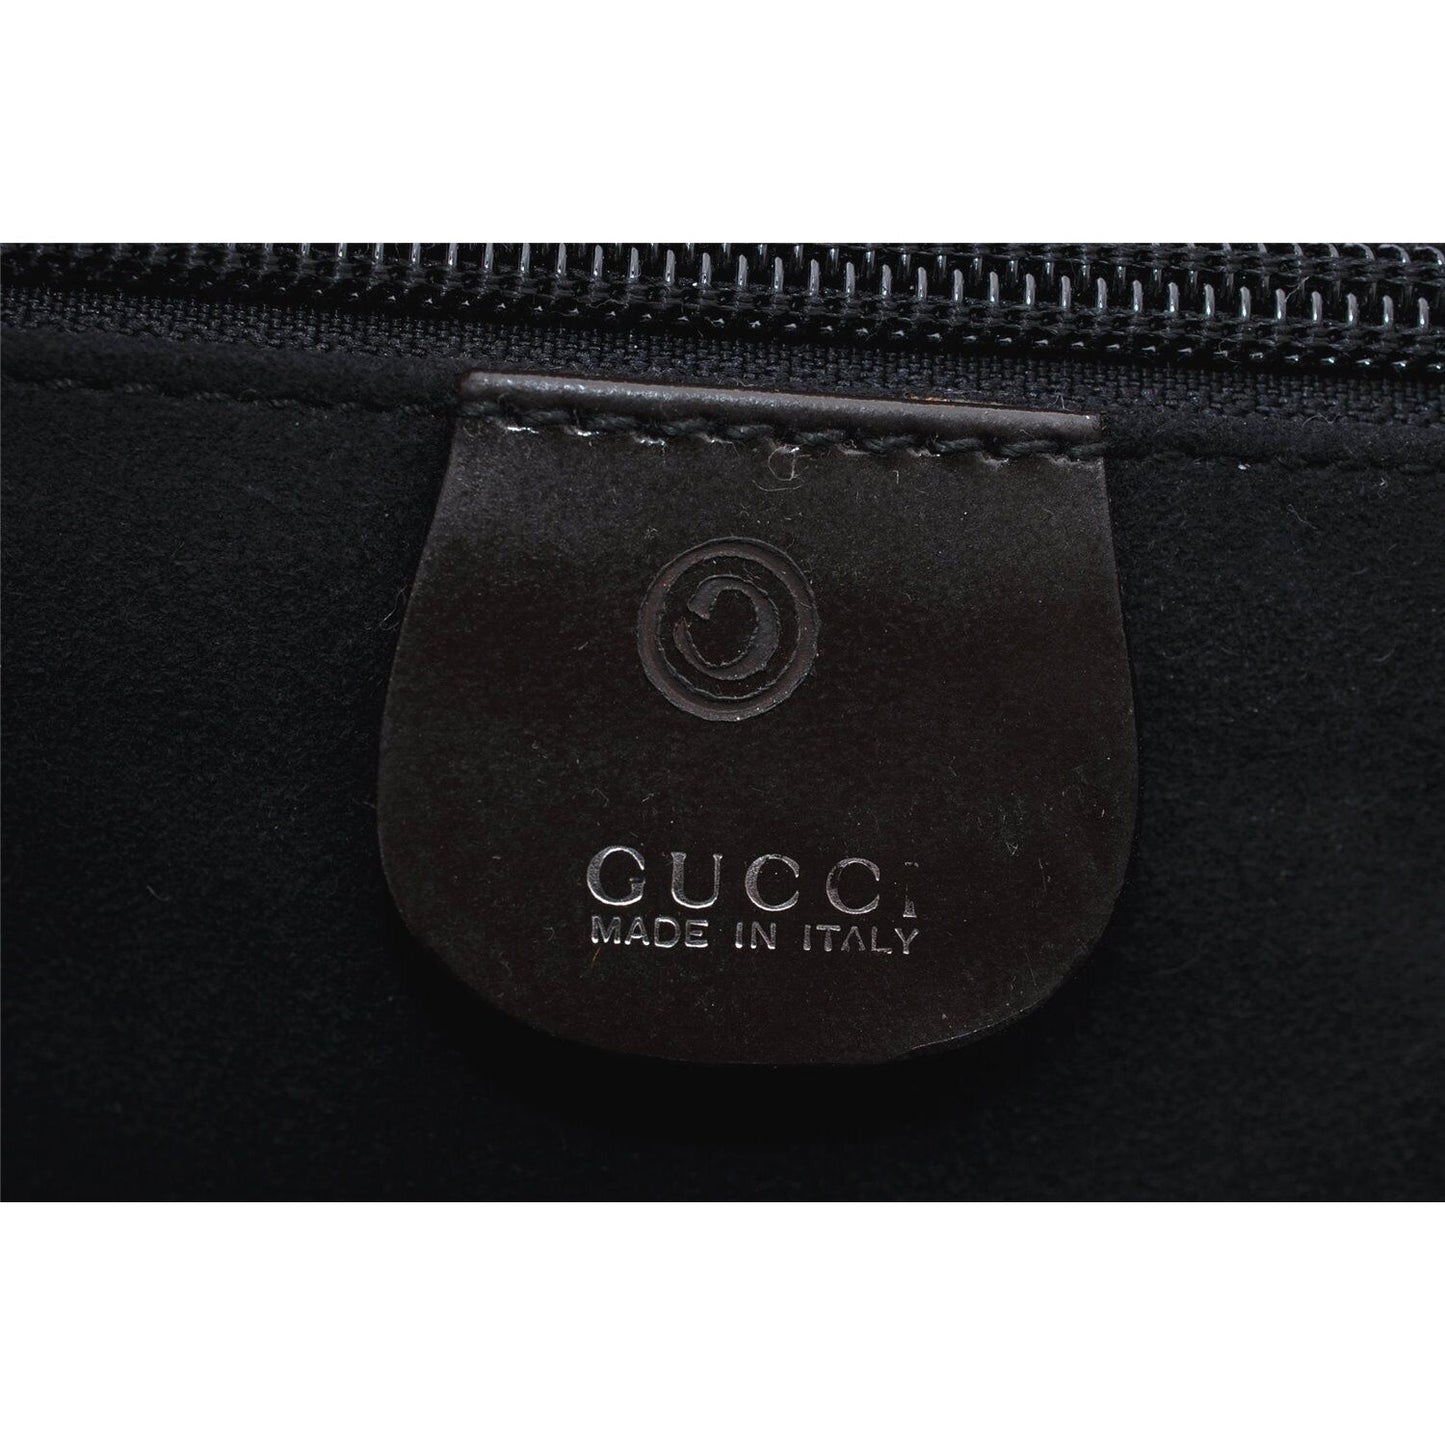 Gucci 90's Tom Ford brown leather two-way portfolio or clutch